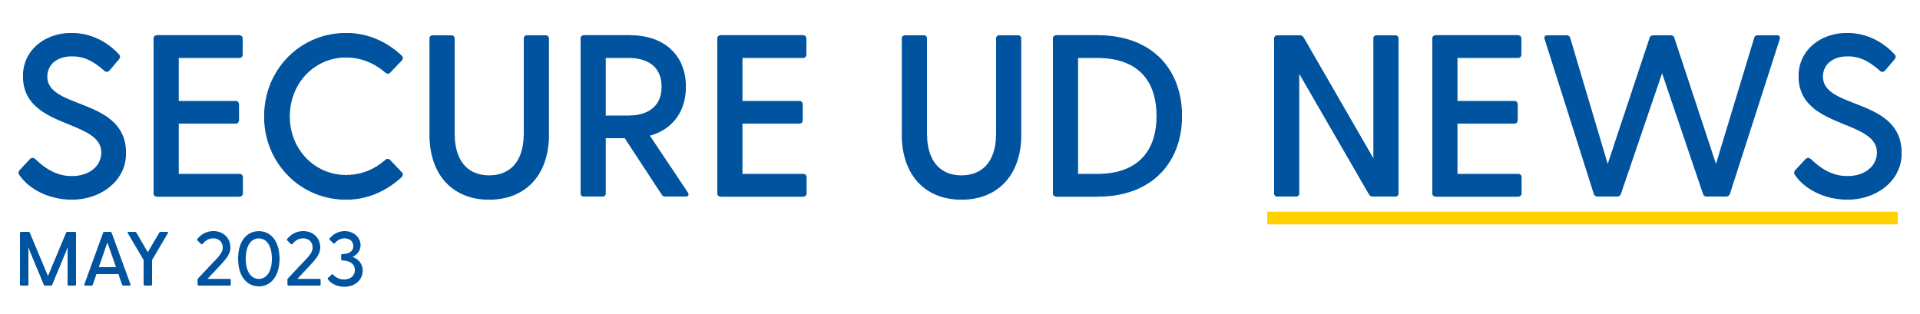 Secure UD News May 2023